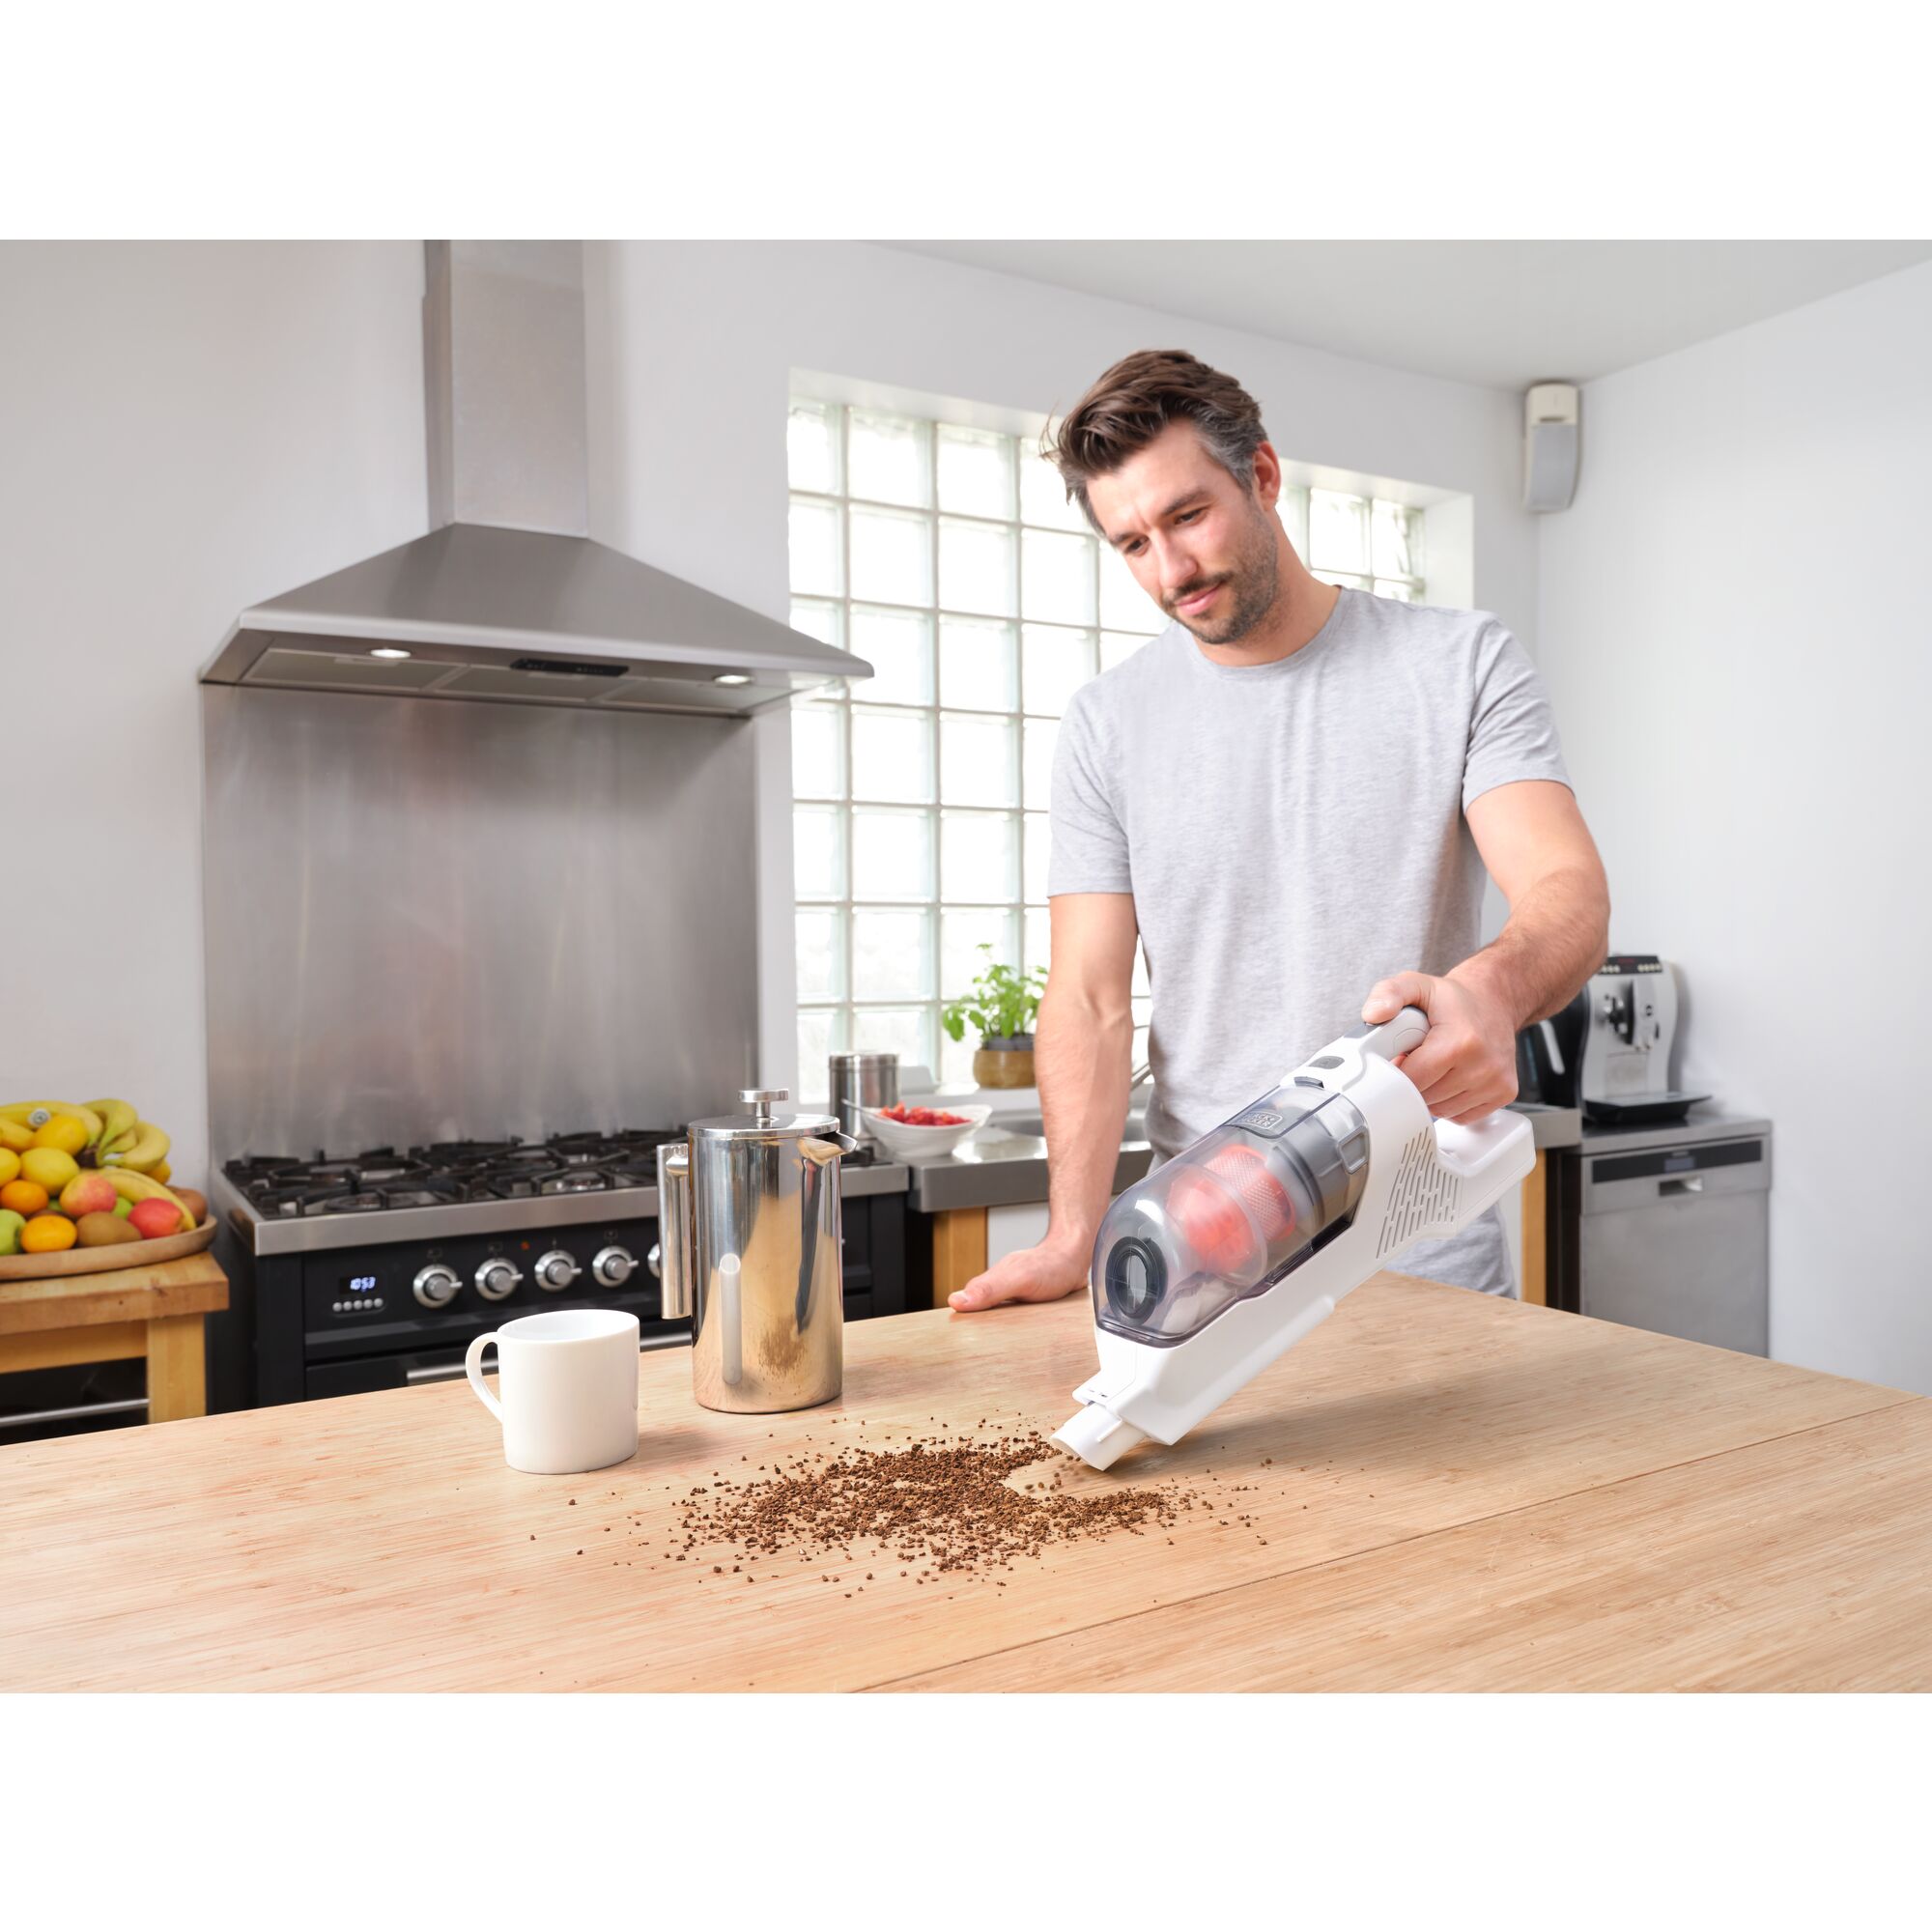 Handheld portion of Black and decker power series plus cordless stick vacuum being used by person to clean up spilled coffee grounds on a countertop